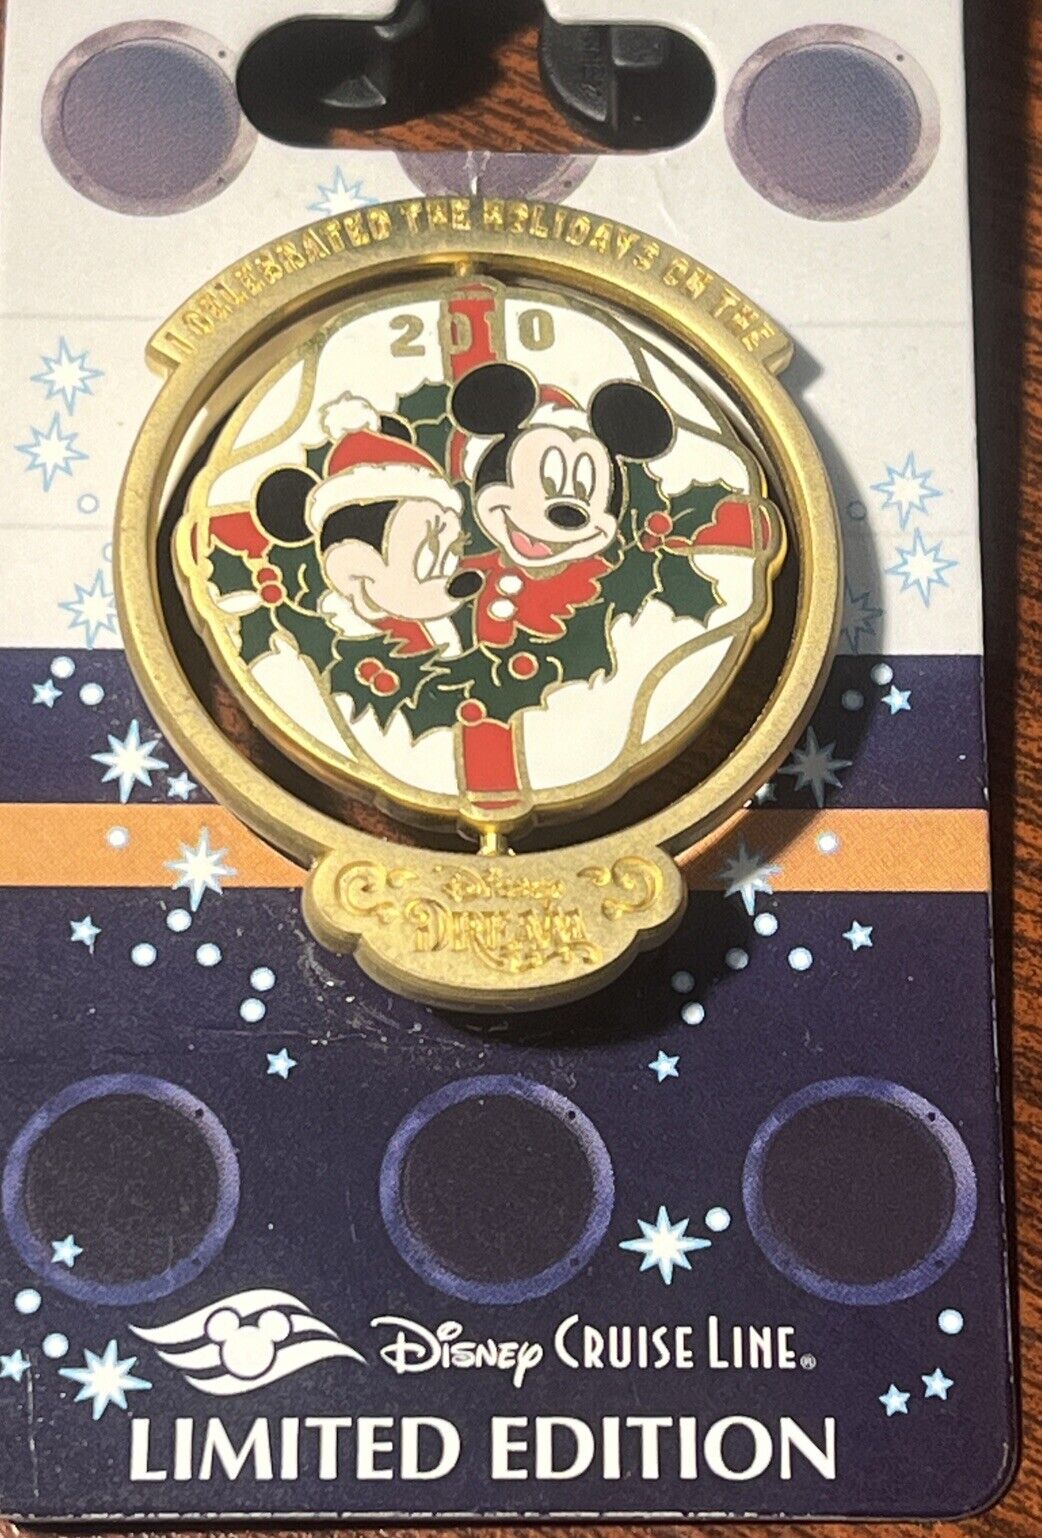 DISNEY DCL HAPPY HOLIDAYS 2010 2011 NEW YEAR MICKEY MINNIE CHRISTMAS LE 1000 PIN